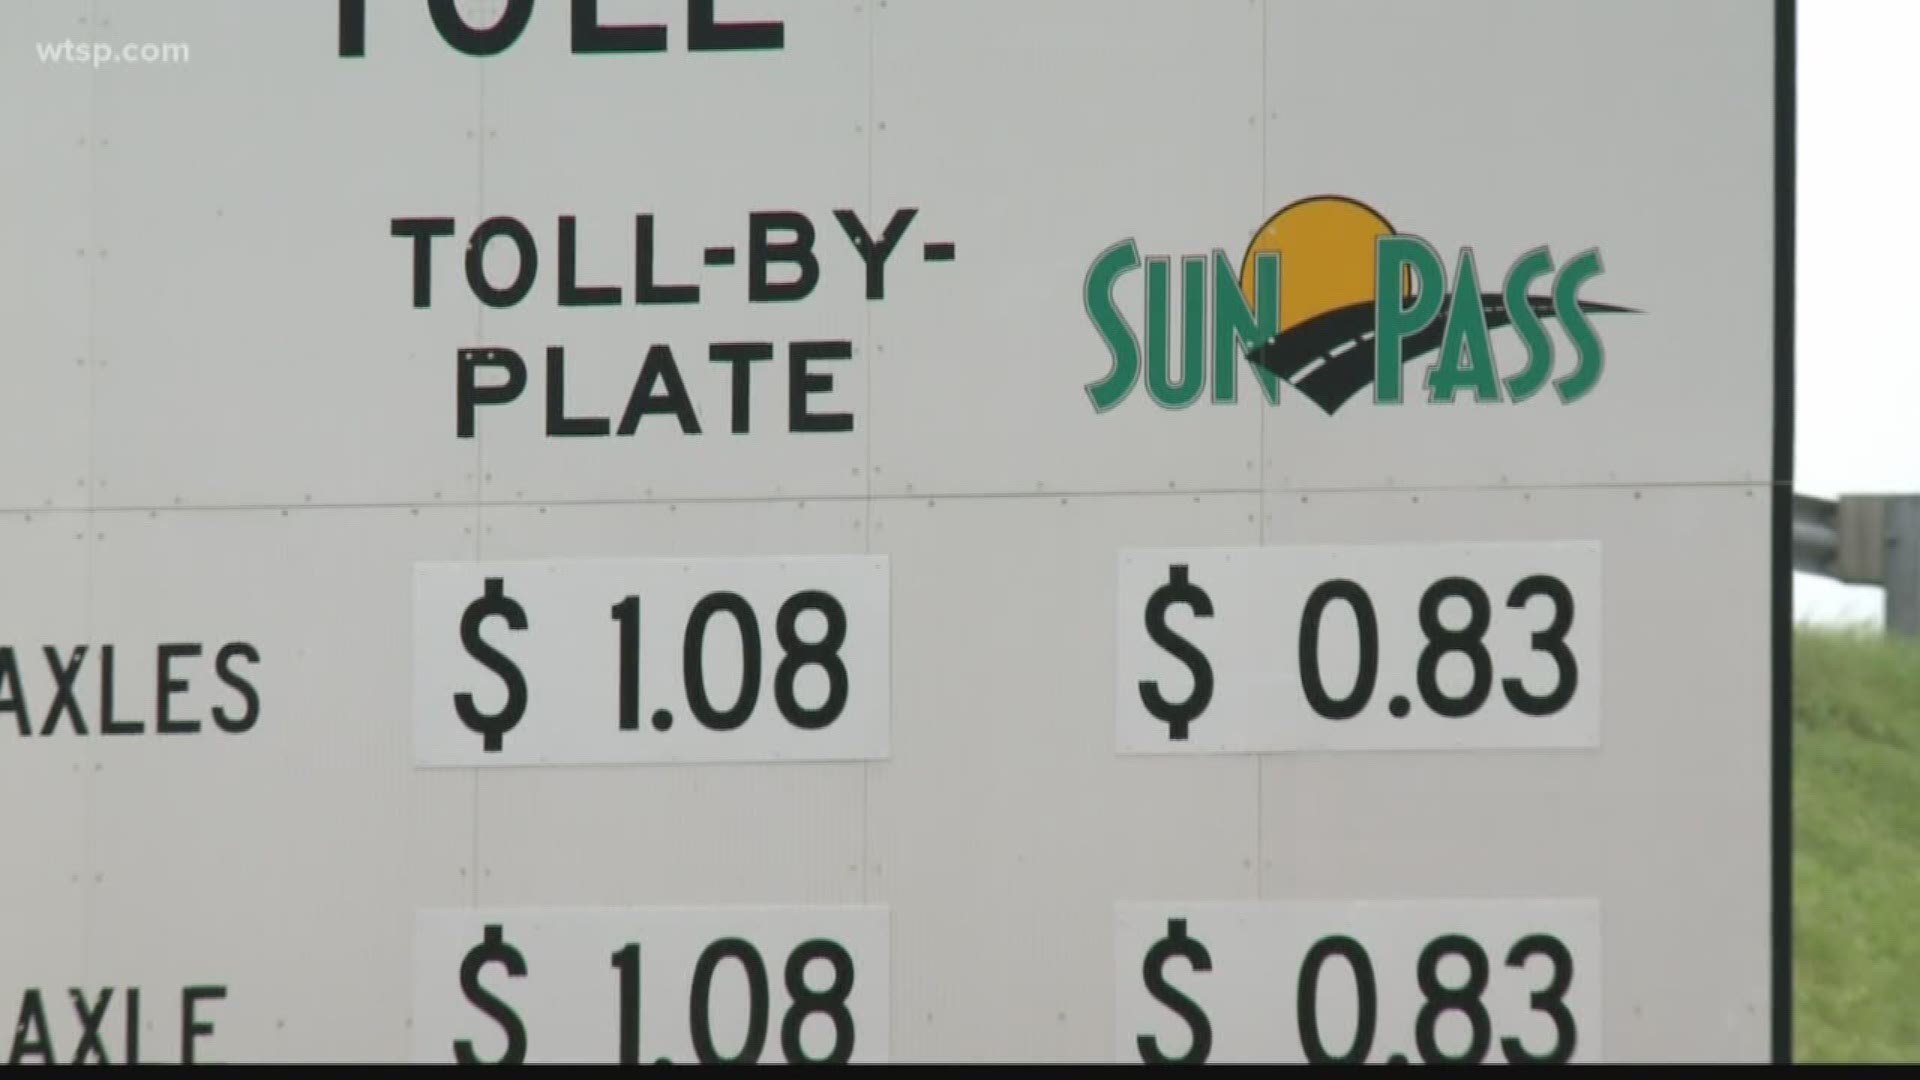 The state is slowly processing the first of approx. 100 million SunPass tolls backlogged.  More will come later in the week